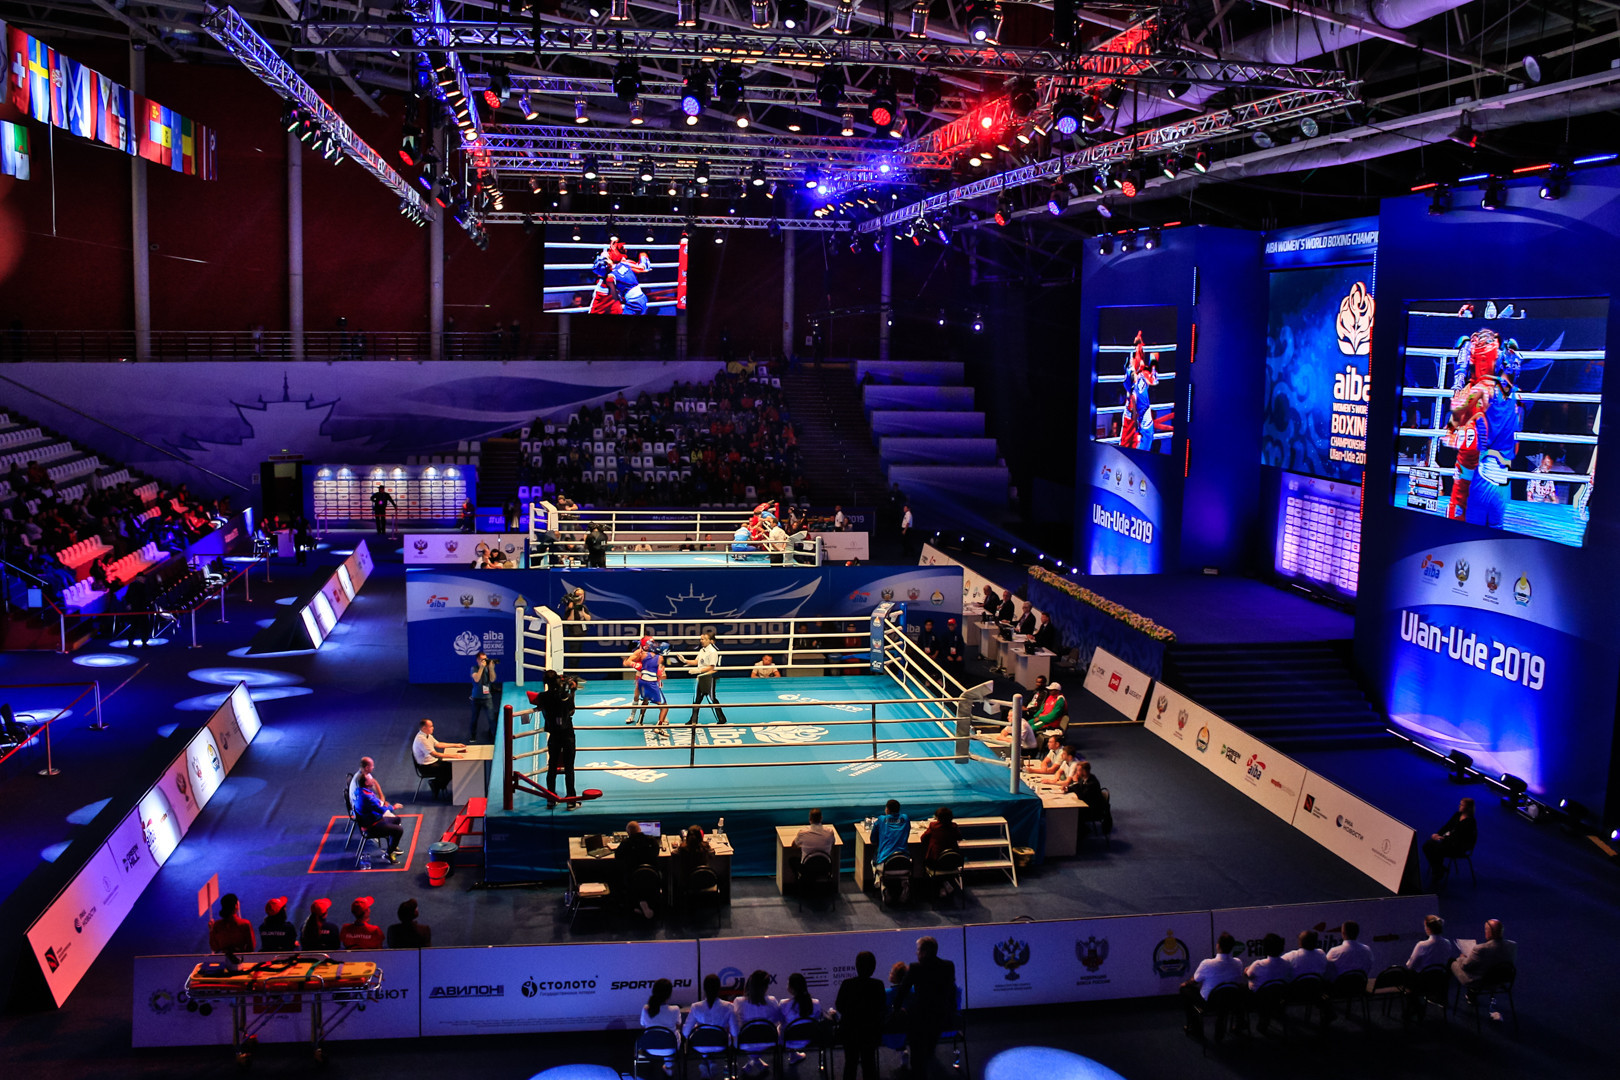 Competition continues tomorrow in the lightweight and light heavyweight divisions ©AIBA